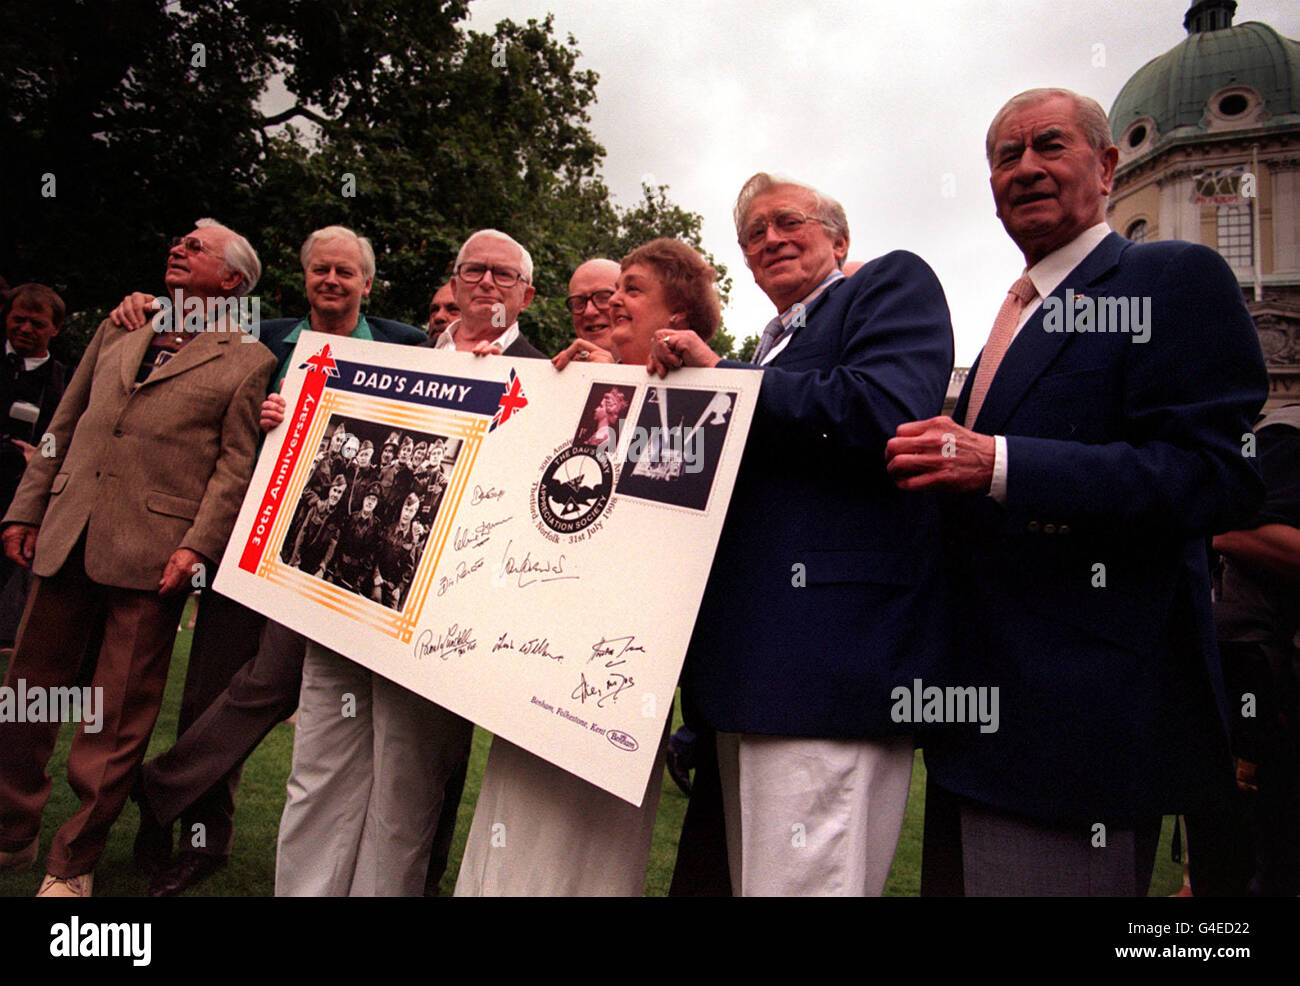 To mark the 30th anniversary of the first broadcast of the vintage comedy show Dad's Army actors and writers (L-R) Clive Dunn, Ian Lavender, David Croft, Frank Williams, Pamela Cundell, Jimmy Perry and Bill Pertwee join a reunion at the Imperial War Museum to coincide with the release of new audio tapes, BBC2's first series repeat today (Friday) and the release of a signed Dad's Army first-day cover. Photo by Matthew Fearn/PA Stock Photo